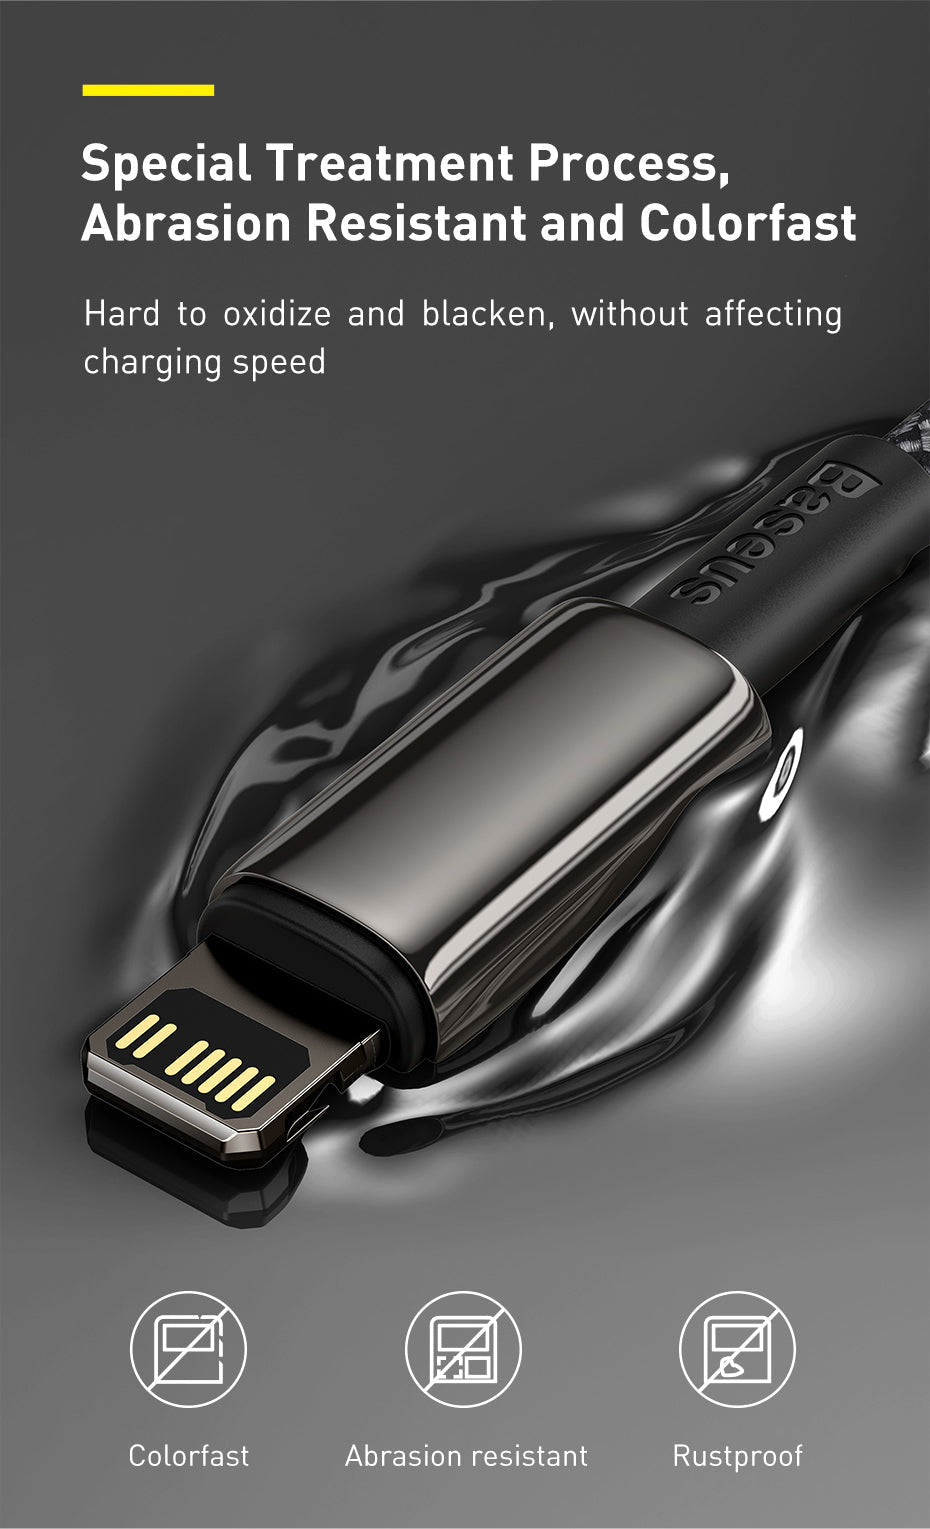 BASEUS PD (20W) TUNGSTEN GOLD FAST CHARGING TYPE-C TO IPH DATA CABLE (1M)